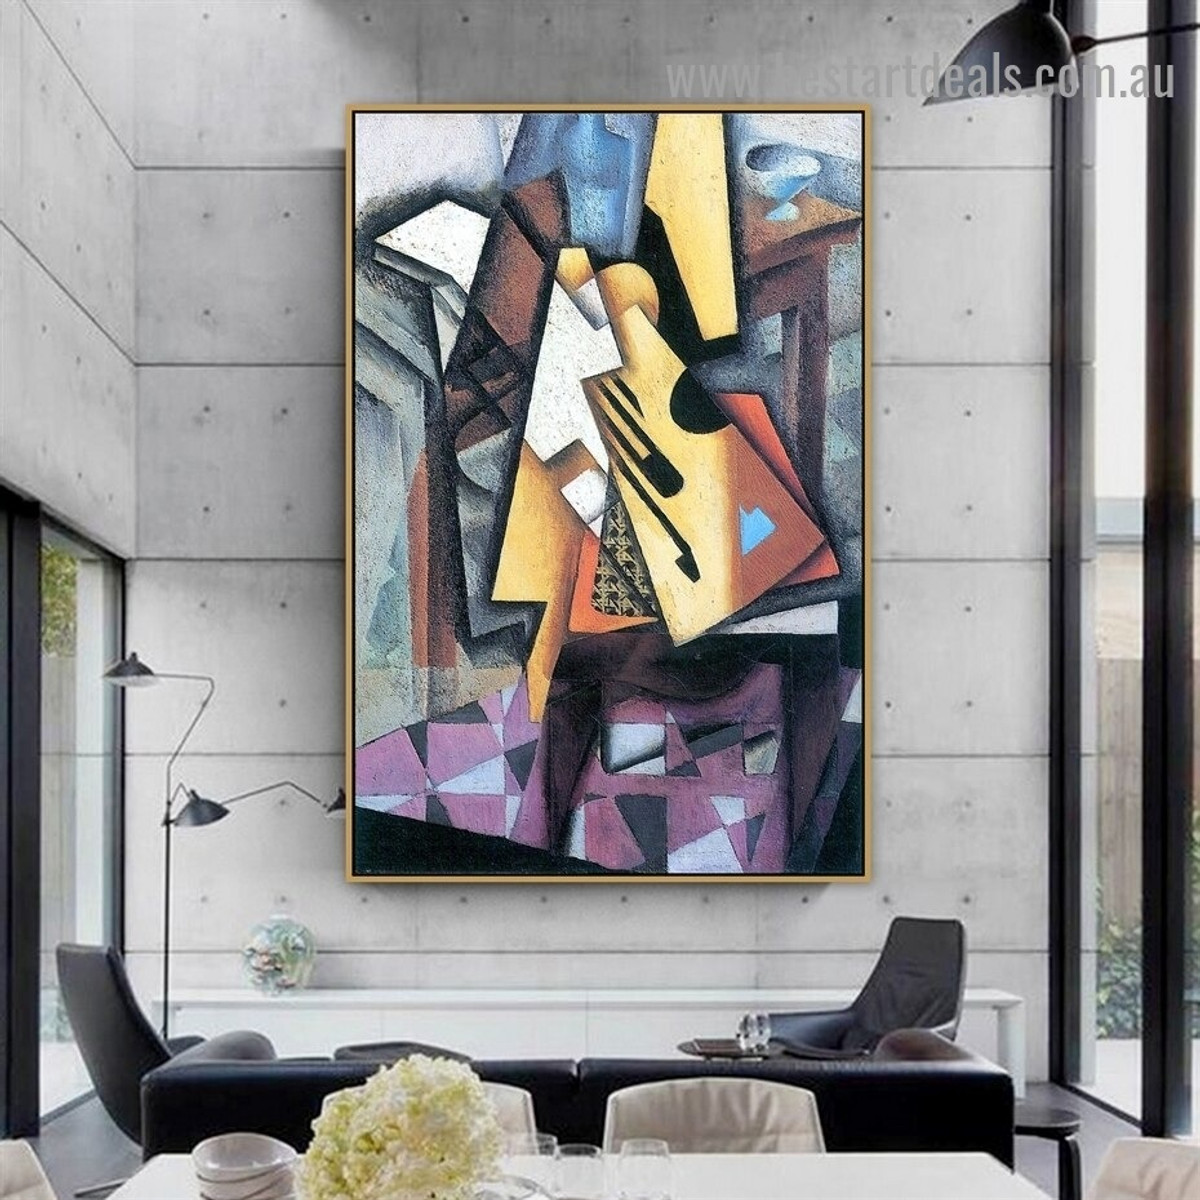 Guitar on a Chair Juan Gris Still Life Synthetic Cubism Reproduction Portrait Painting Canvas Print for Room Wall Decoration